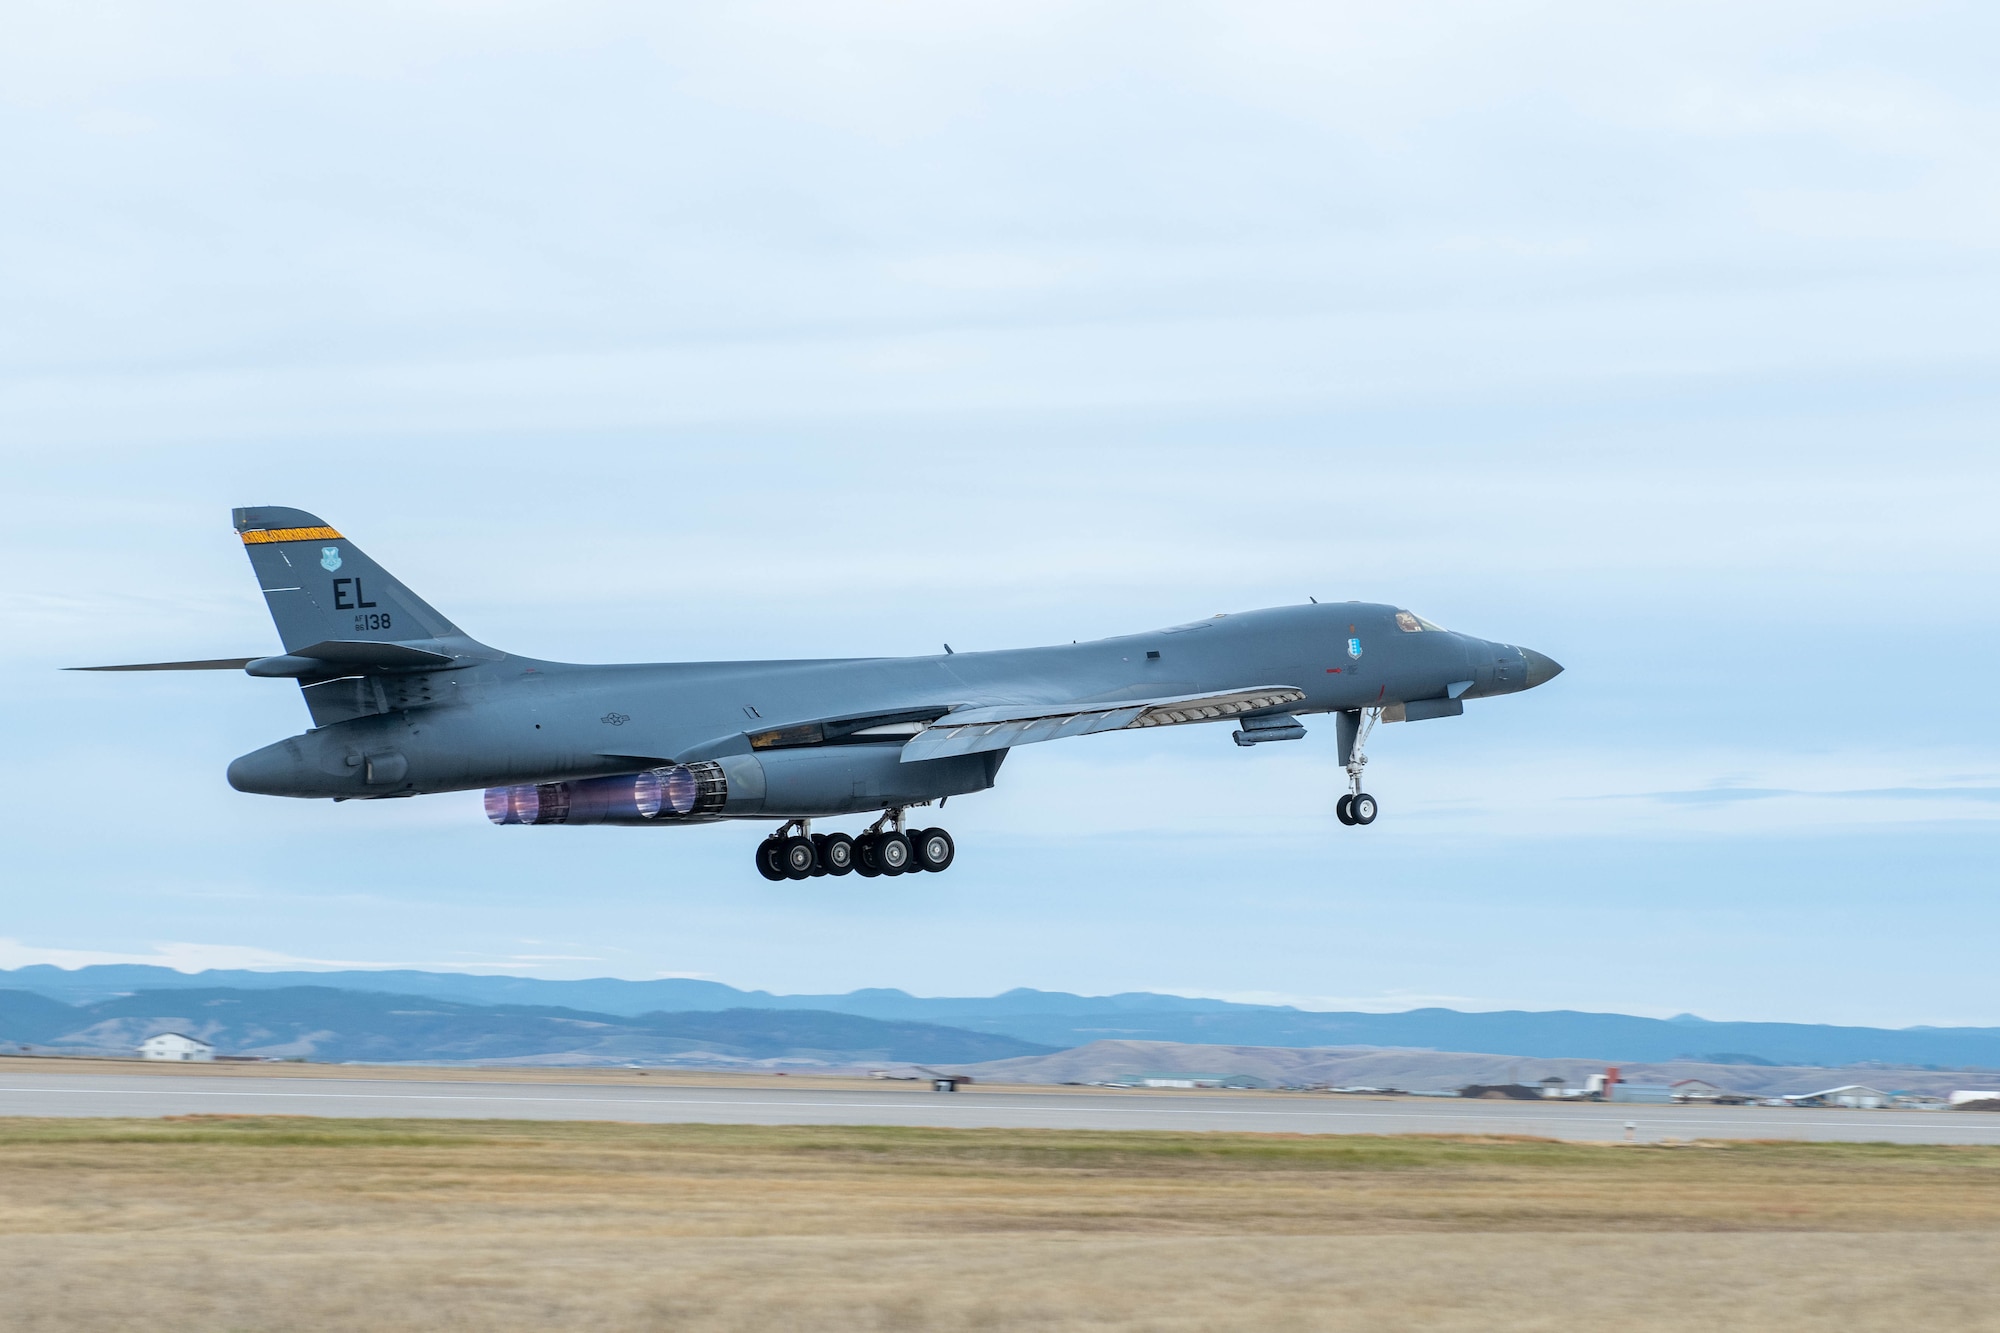 Maj. Gen. Andrew Gebara, 8th Air Force and Joint-Global Strike Operations Center commander, takes off in a B-1B Lancer at Ellsworth Air Force Base, S.D., Oct. 26, 2021. Gebara is responsible for more than 150 E-4B Nightwatch, B-1B Lancer, B-2 Spirit, B-52 Stratofortress and T-38 Talon aircraft that span six different installations. (U.S. Air Force photo by Airman 1st Class Quentin Marx)